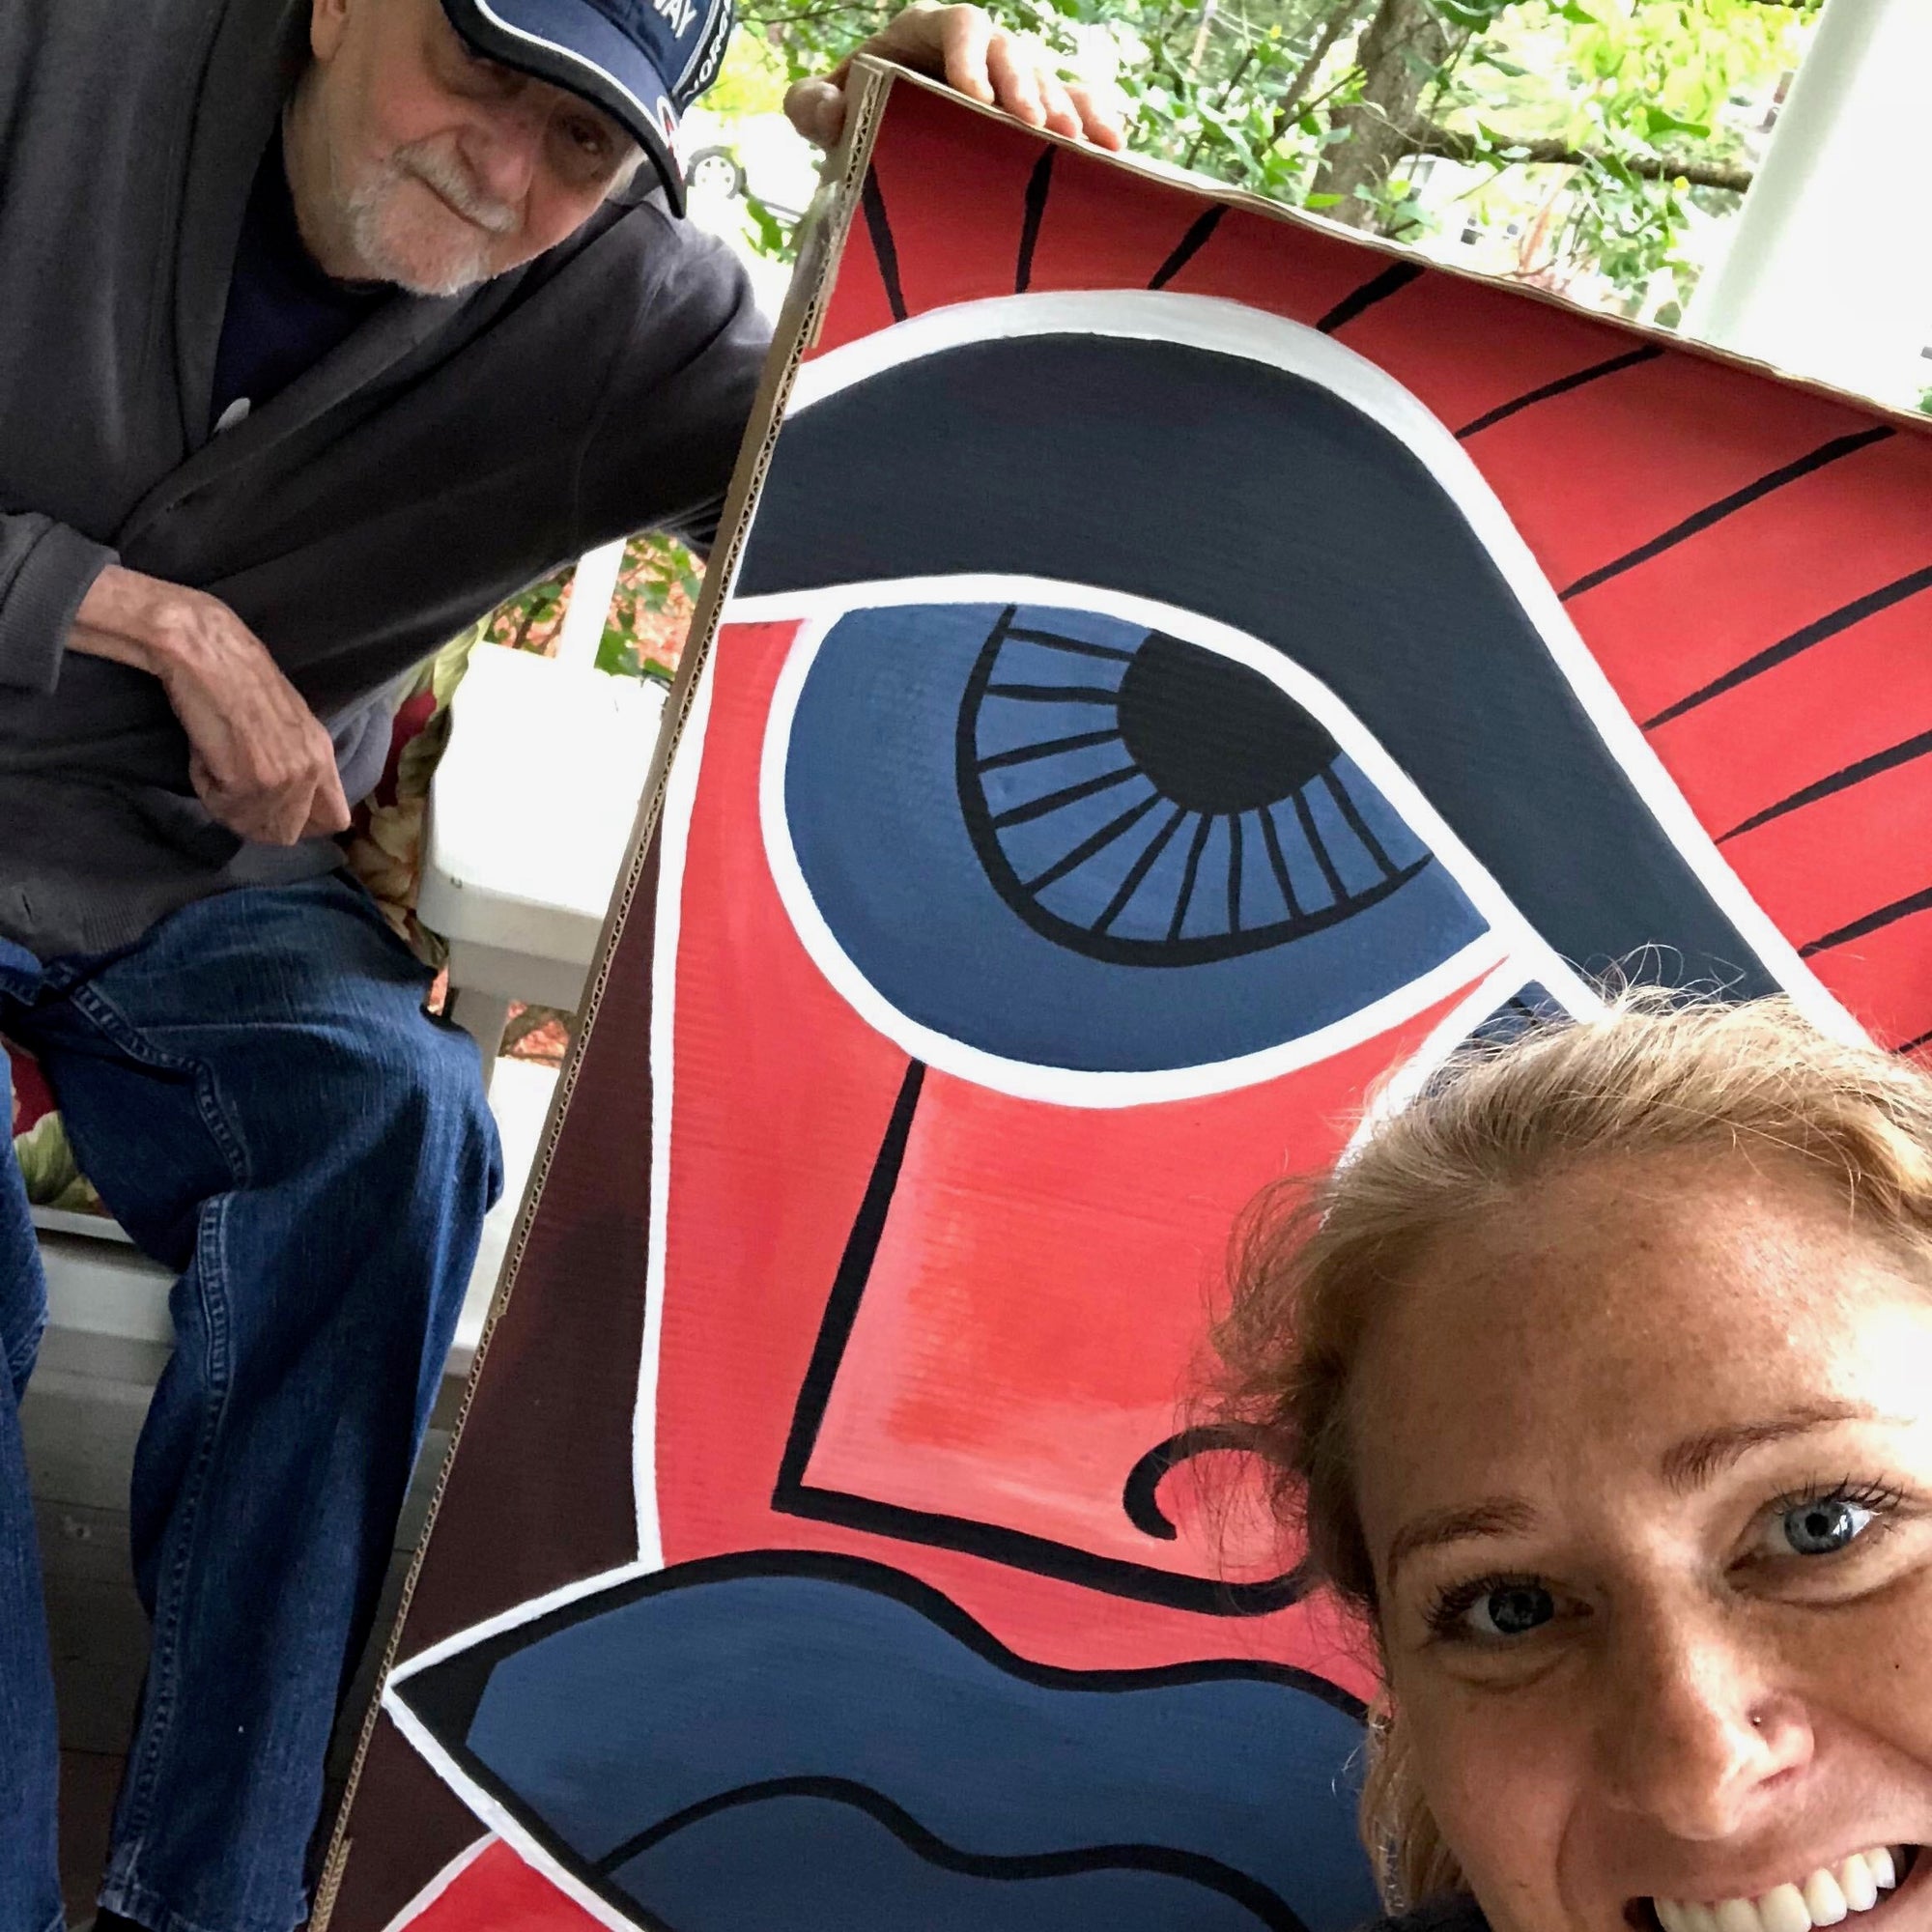 Kristine with her father and his artwork